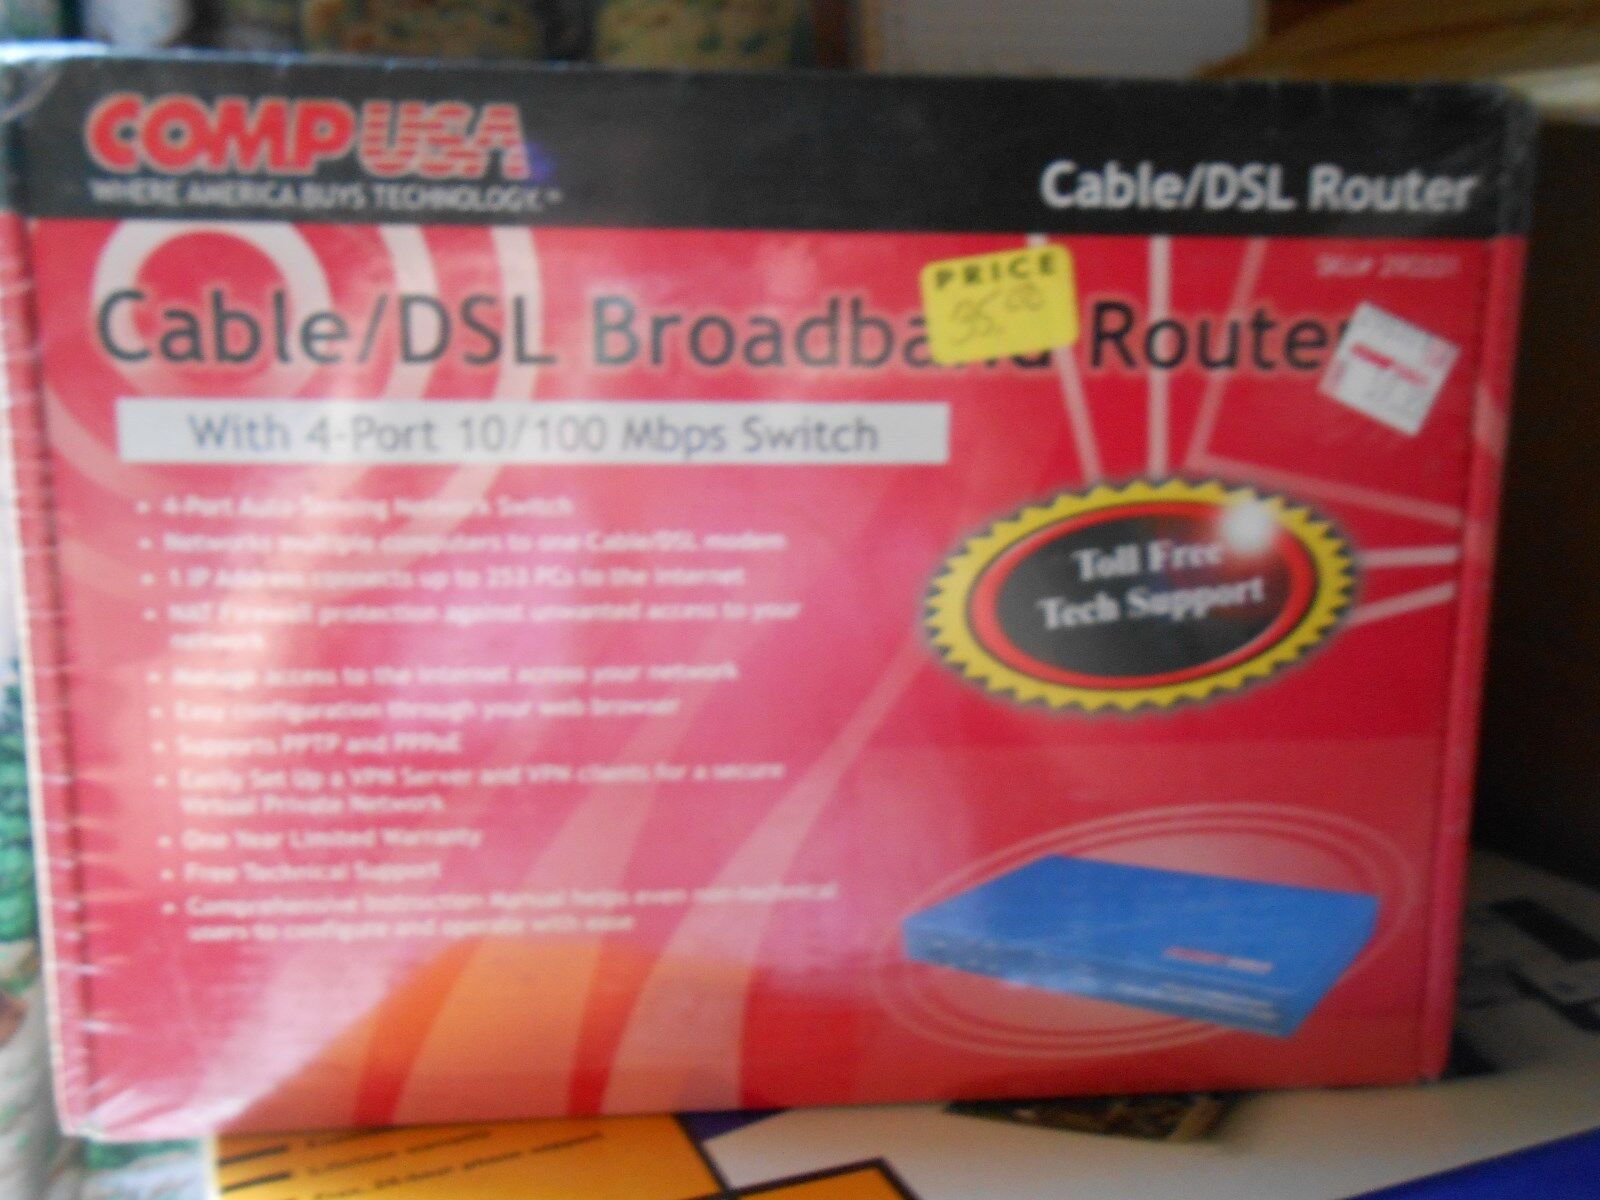 Cable/DSL Broadband Router 4-Port 10/100 Mbps Switch - NEW IN BOX - COMP USA